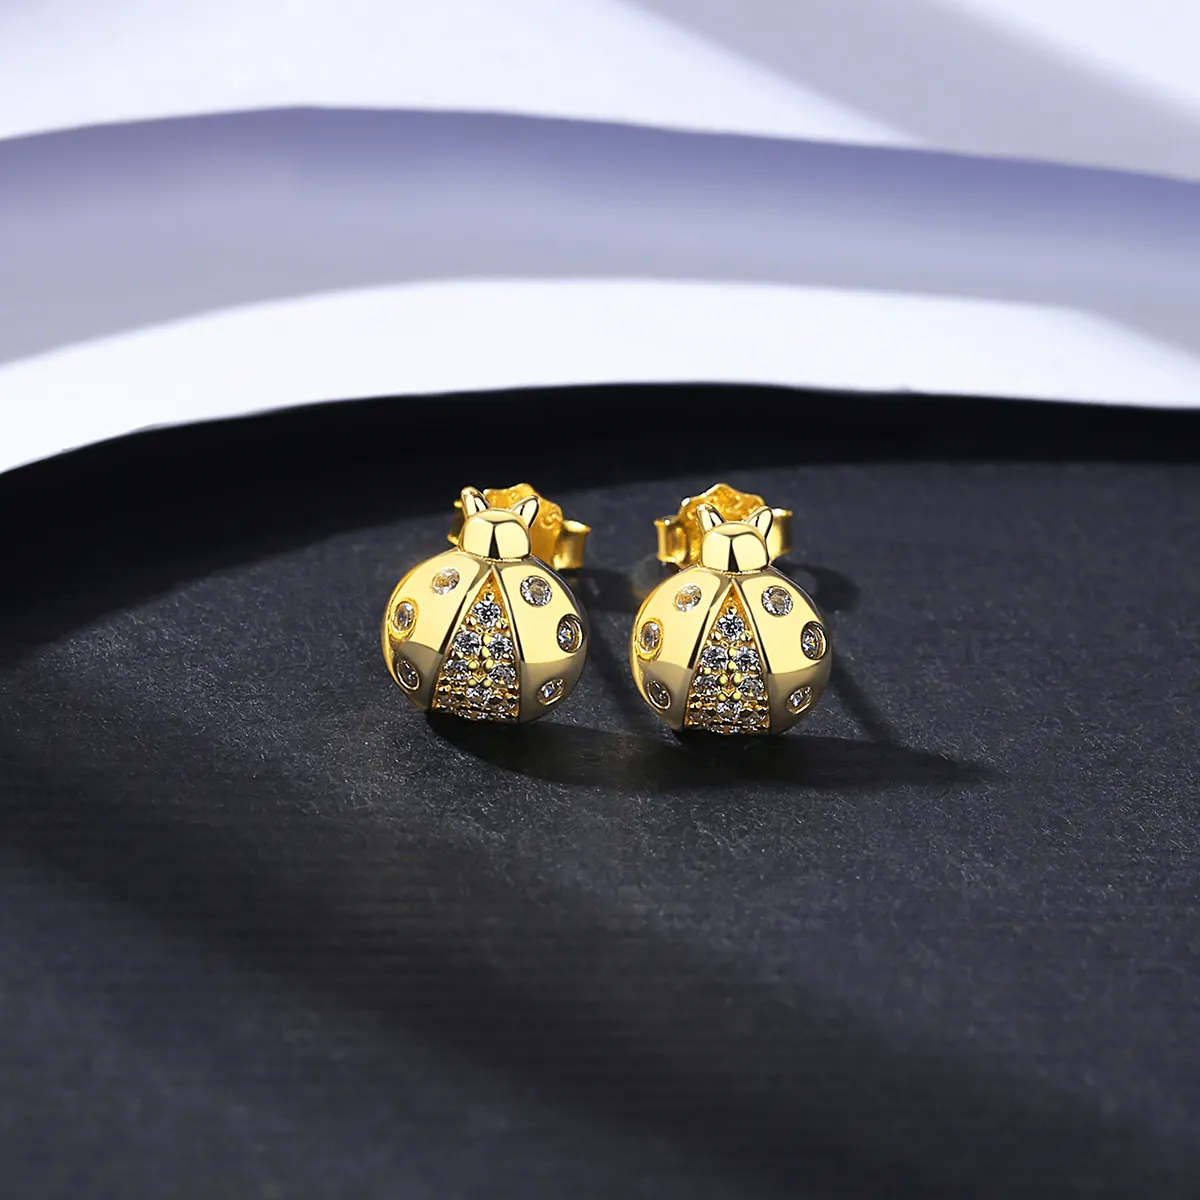 Silver Stud Earrings CZCITY Wholesale Silver Jewelry 925 Sterling Lady Gold Plated Statement Clear Cubic Zirconia Ladybug Stud Earrings For Girls